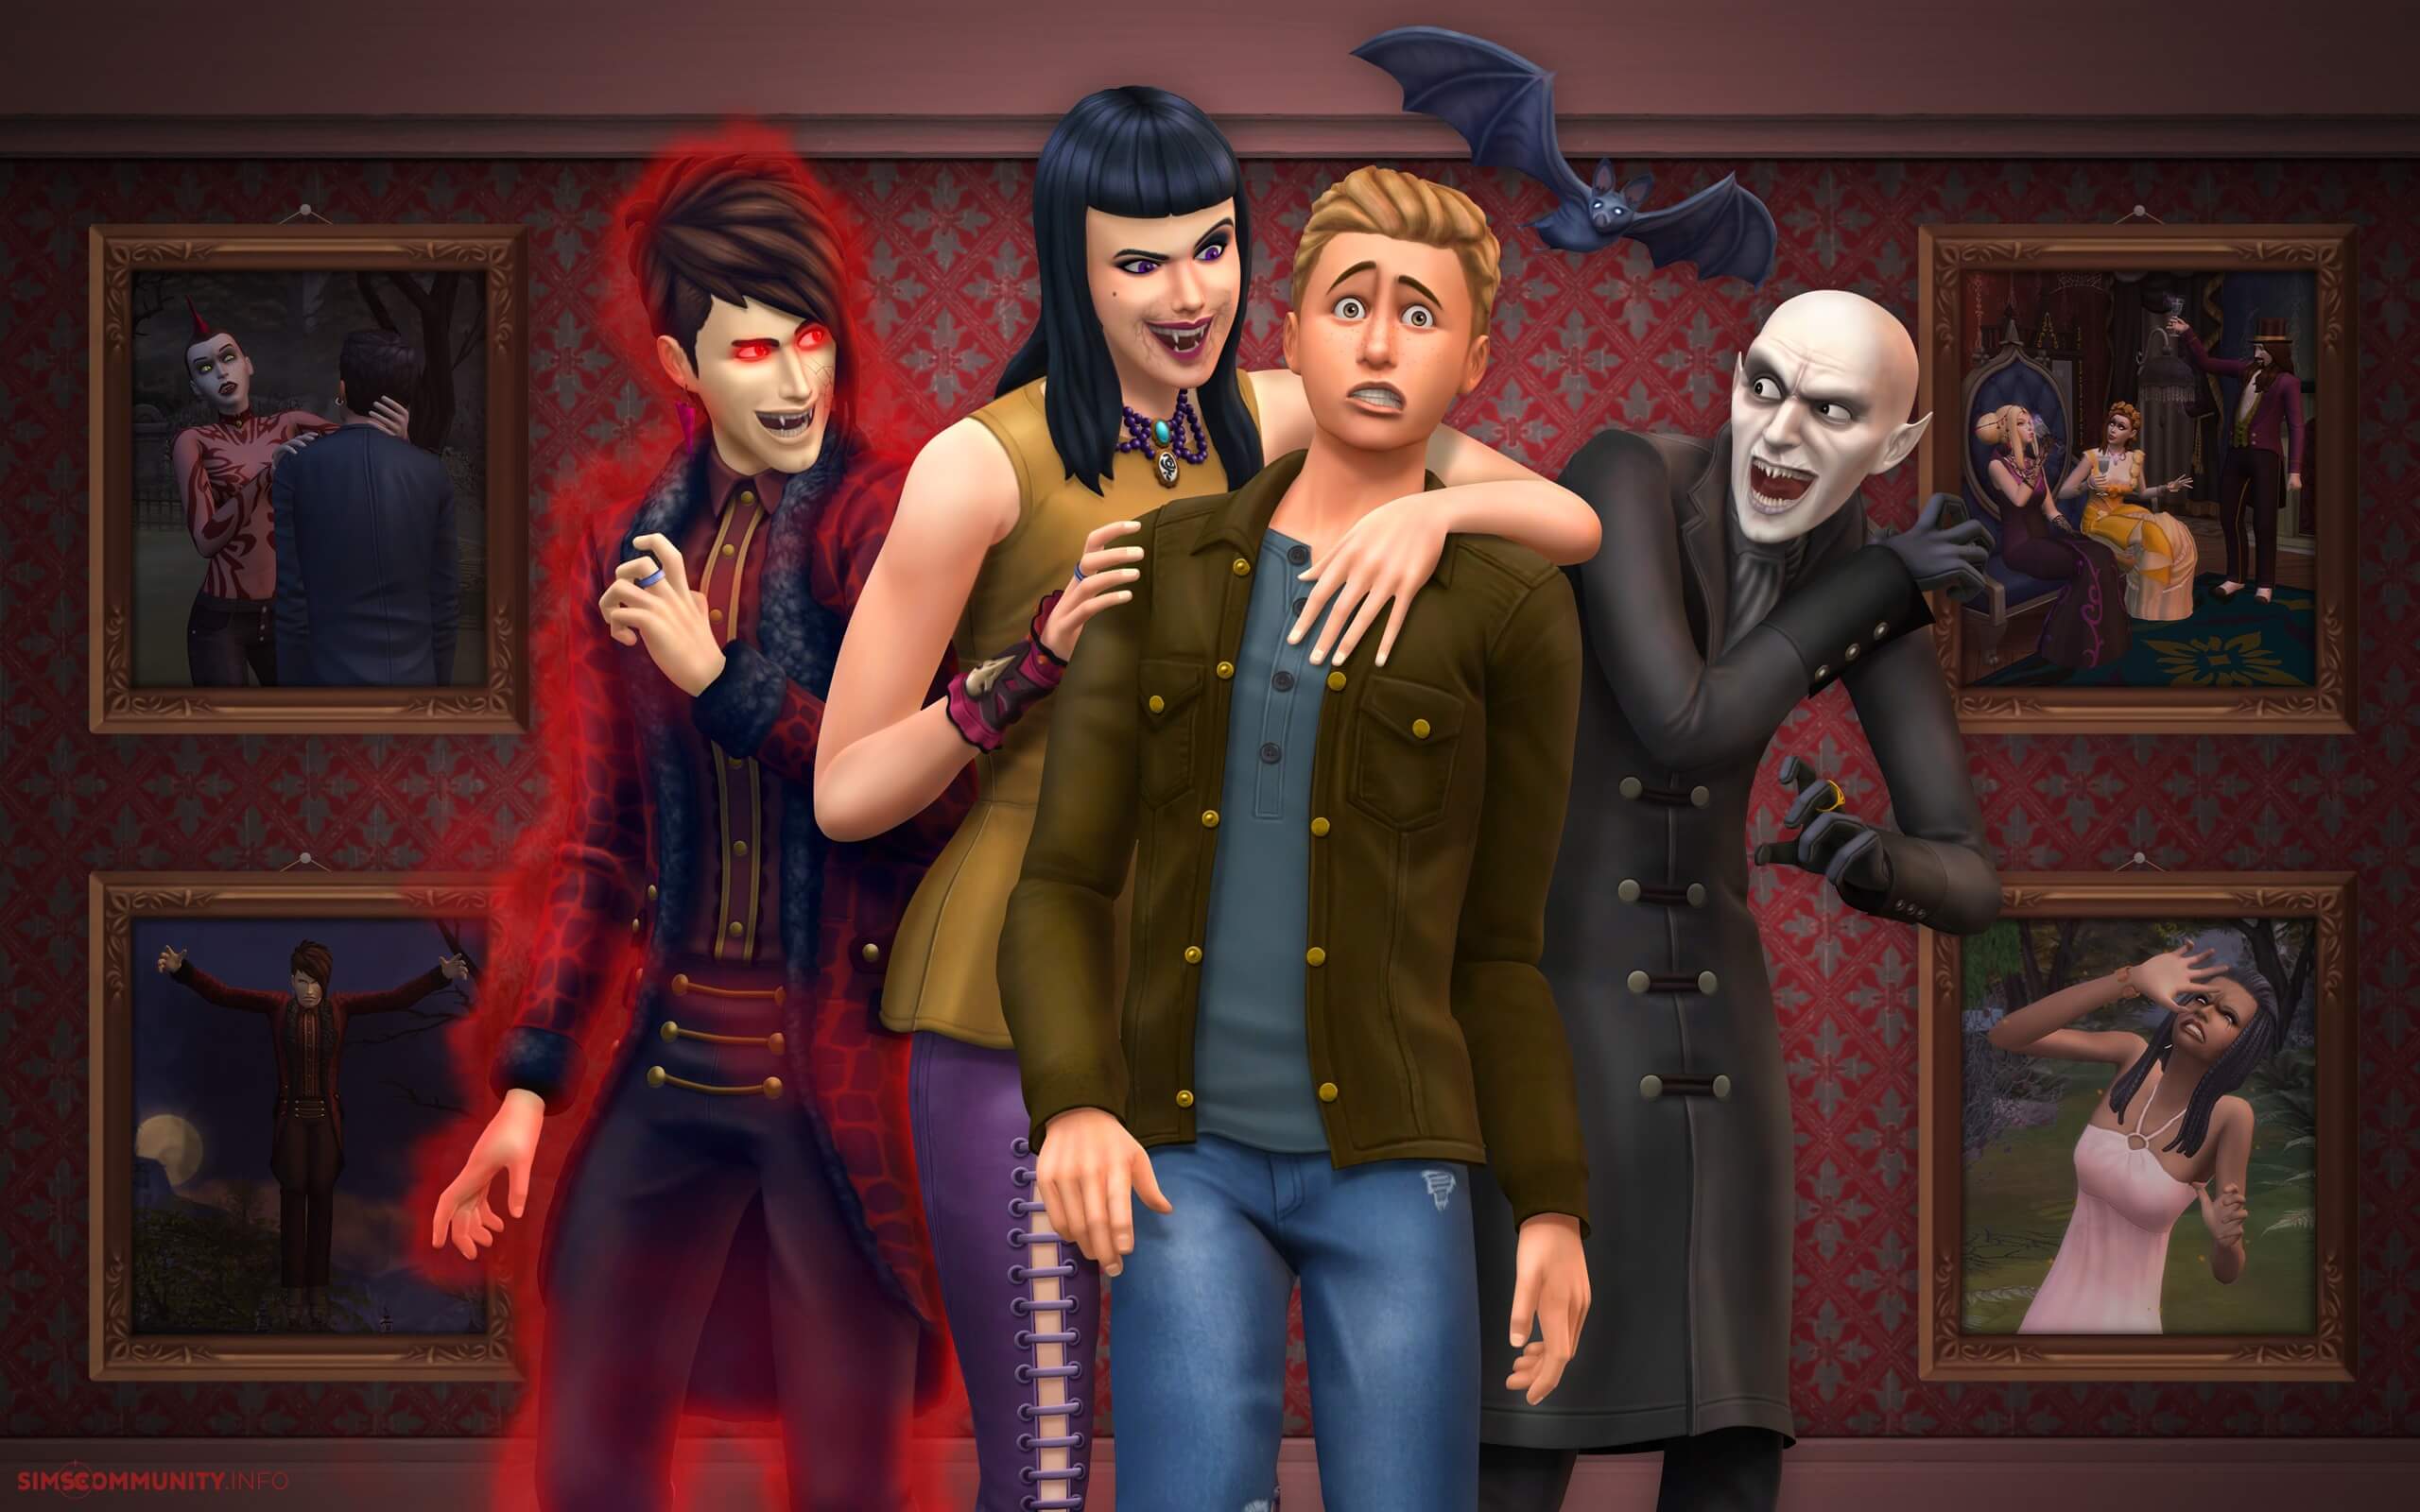 Vampires Can Slay Interaction The Sims 4 Mods Traits The Sims 4